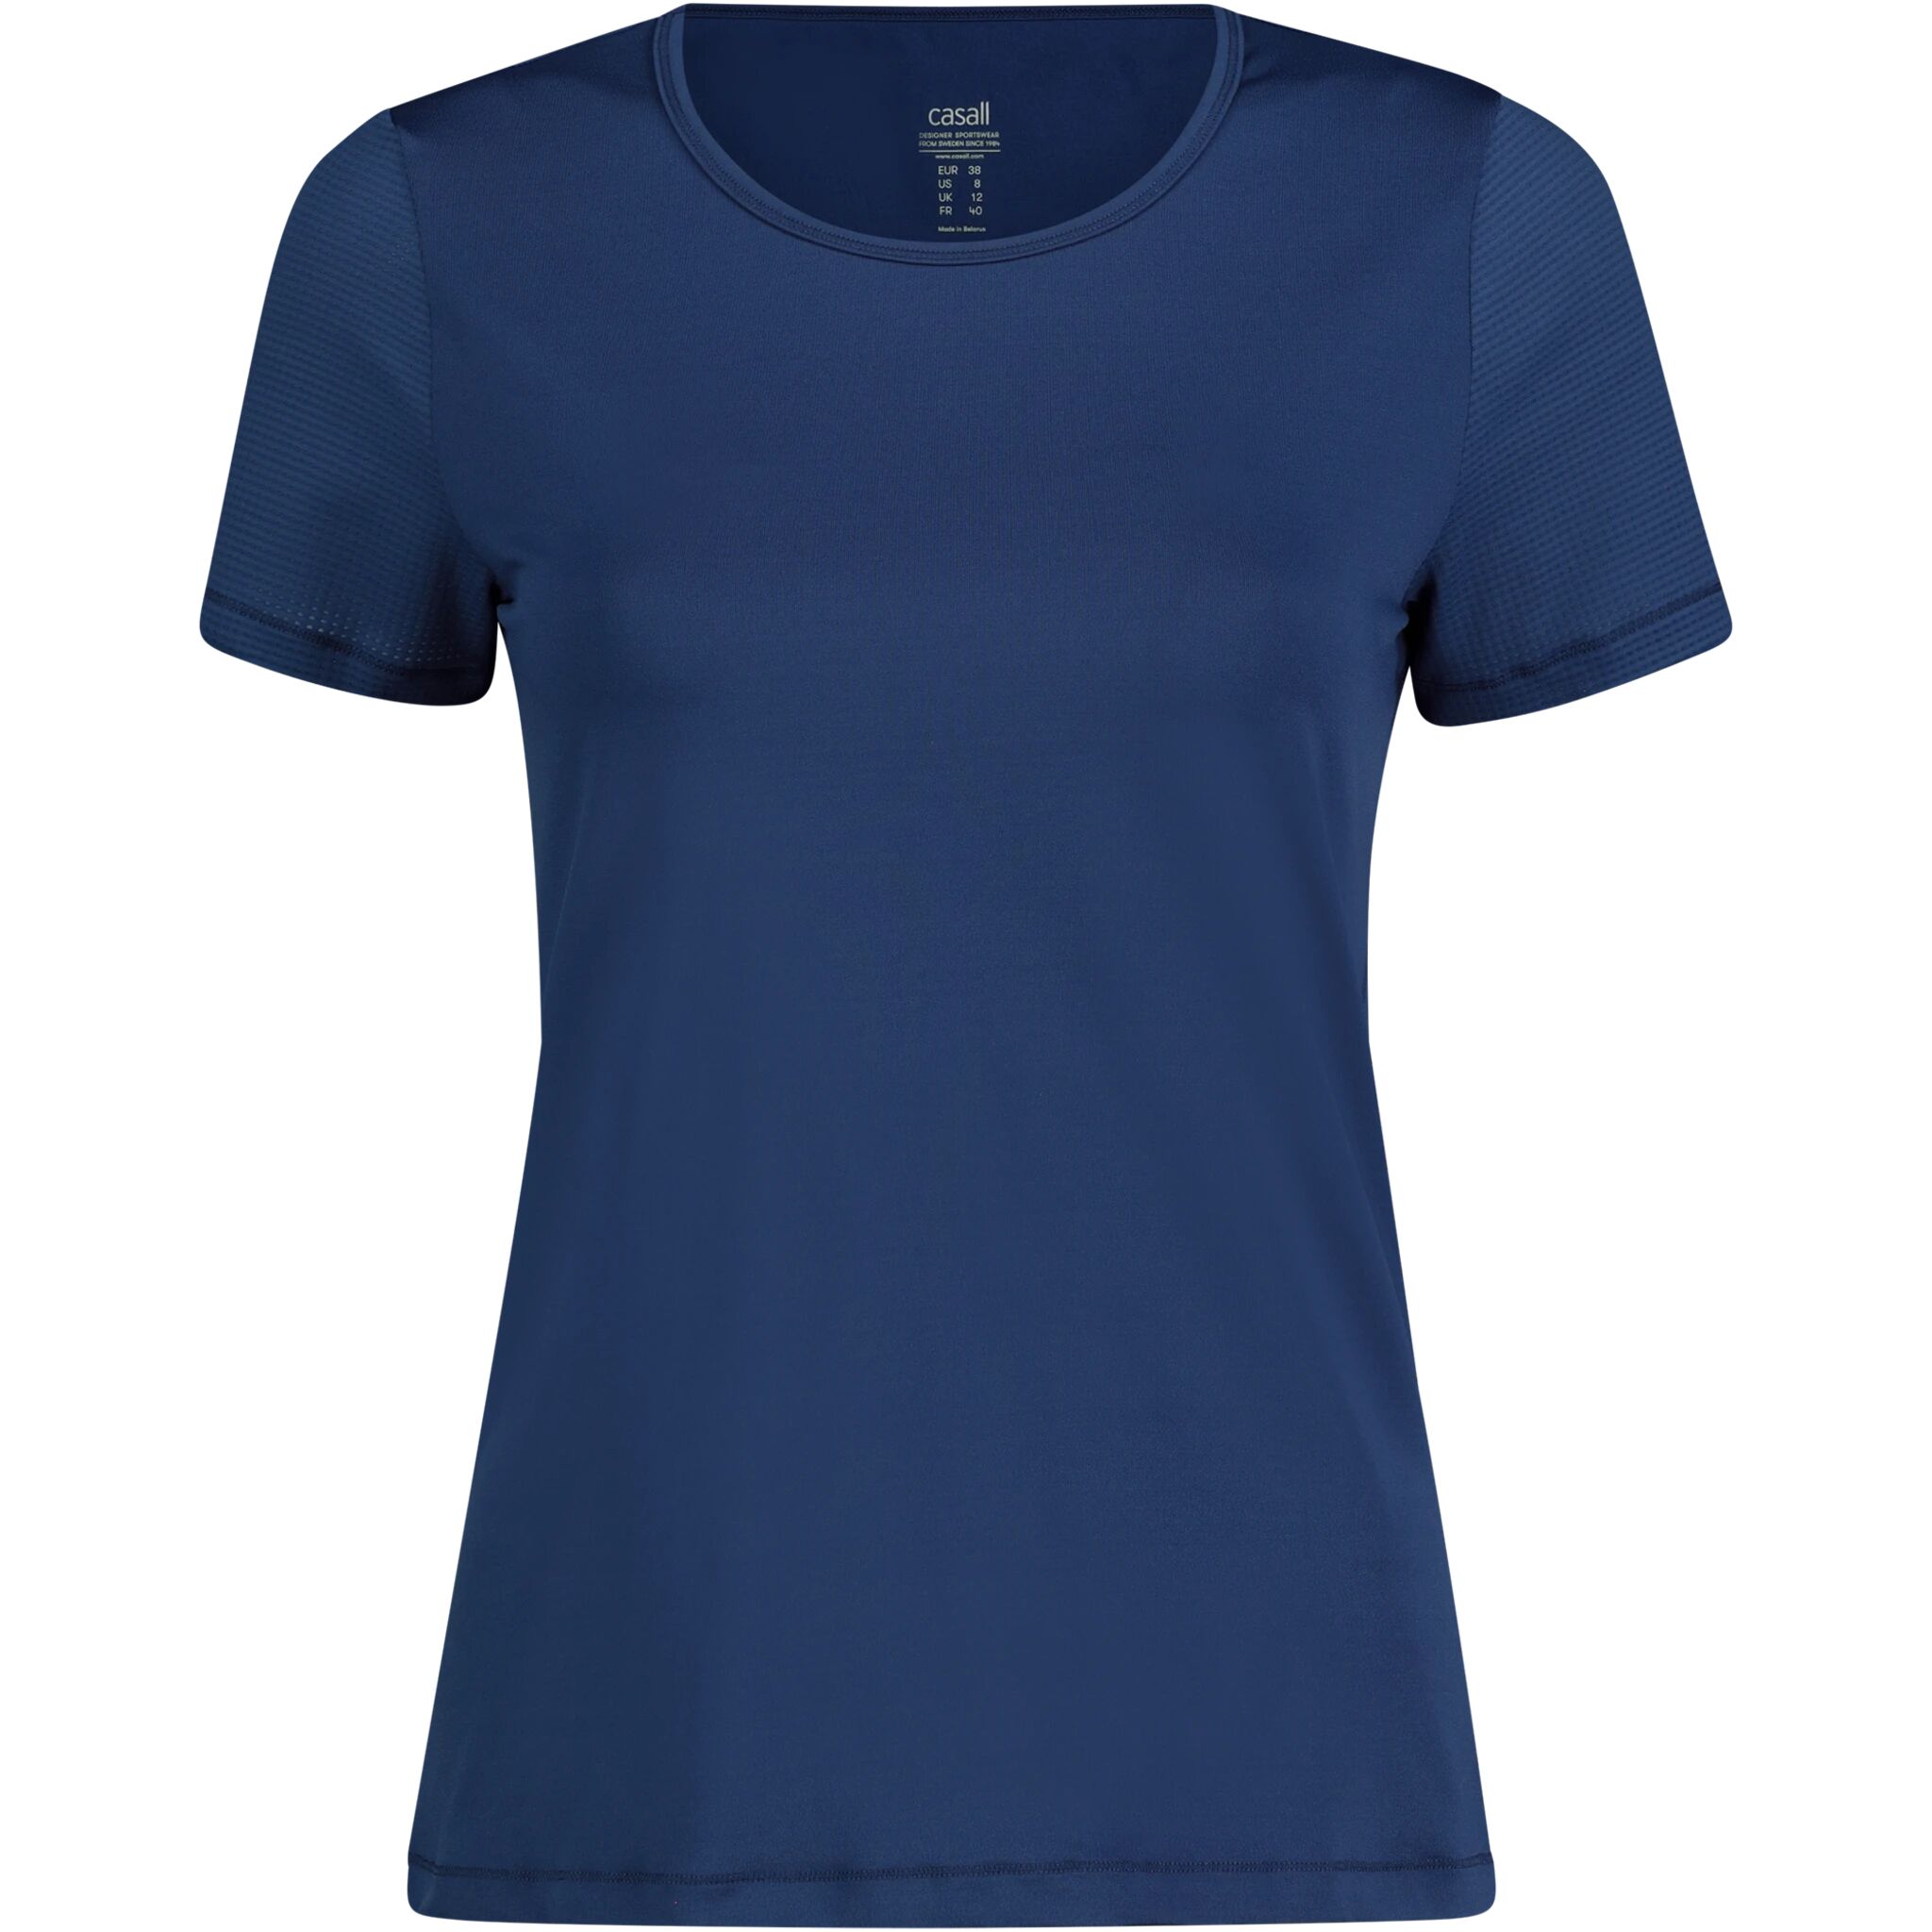 Casall Iconic Tee, t-skjorte dame 36 Steady Blue